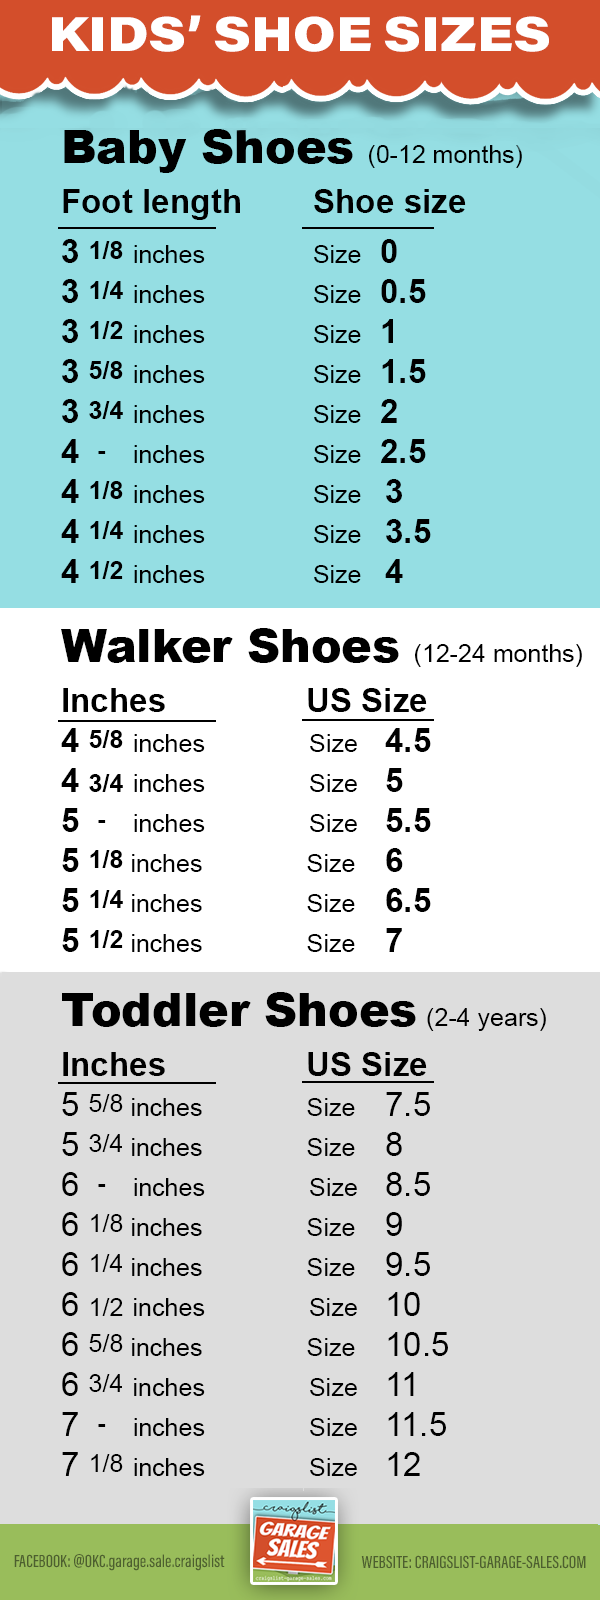 Children Shoe Size Chart - Apps on Google Play